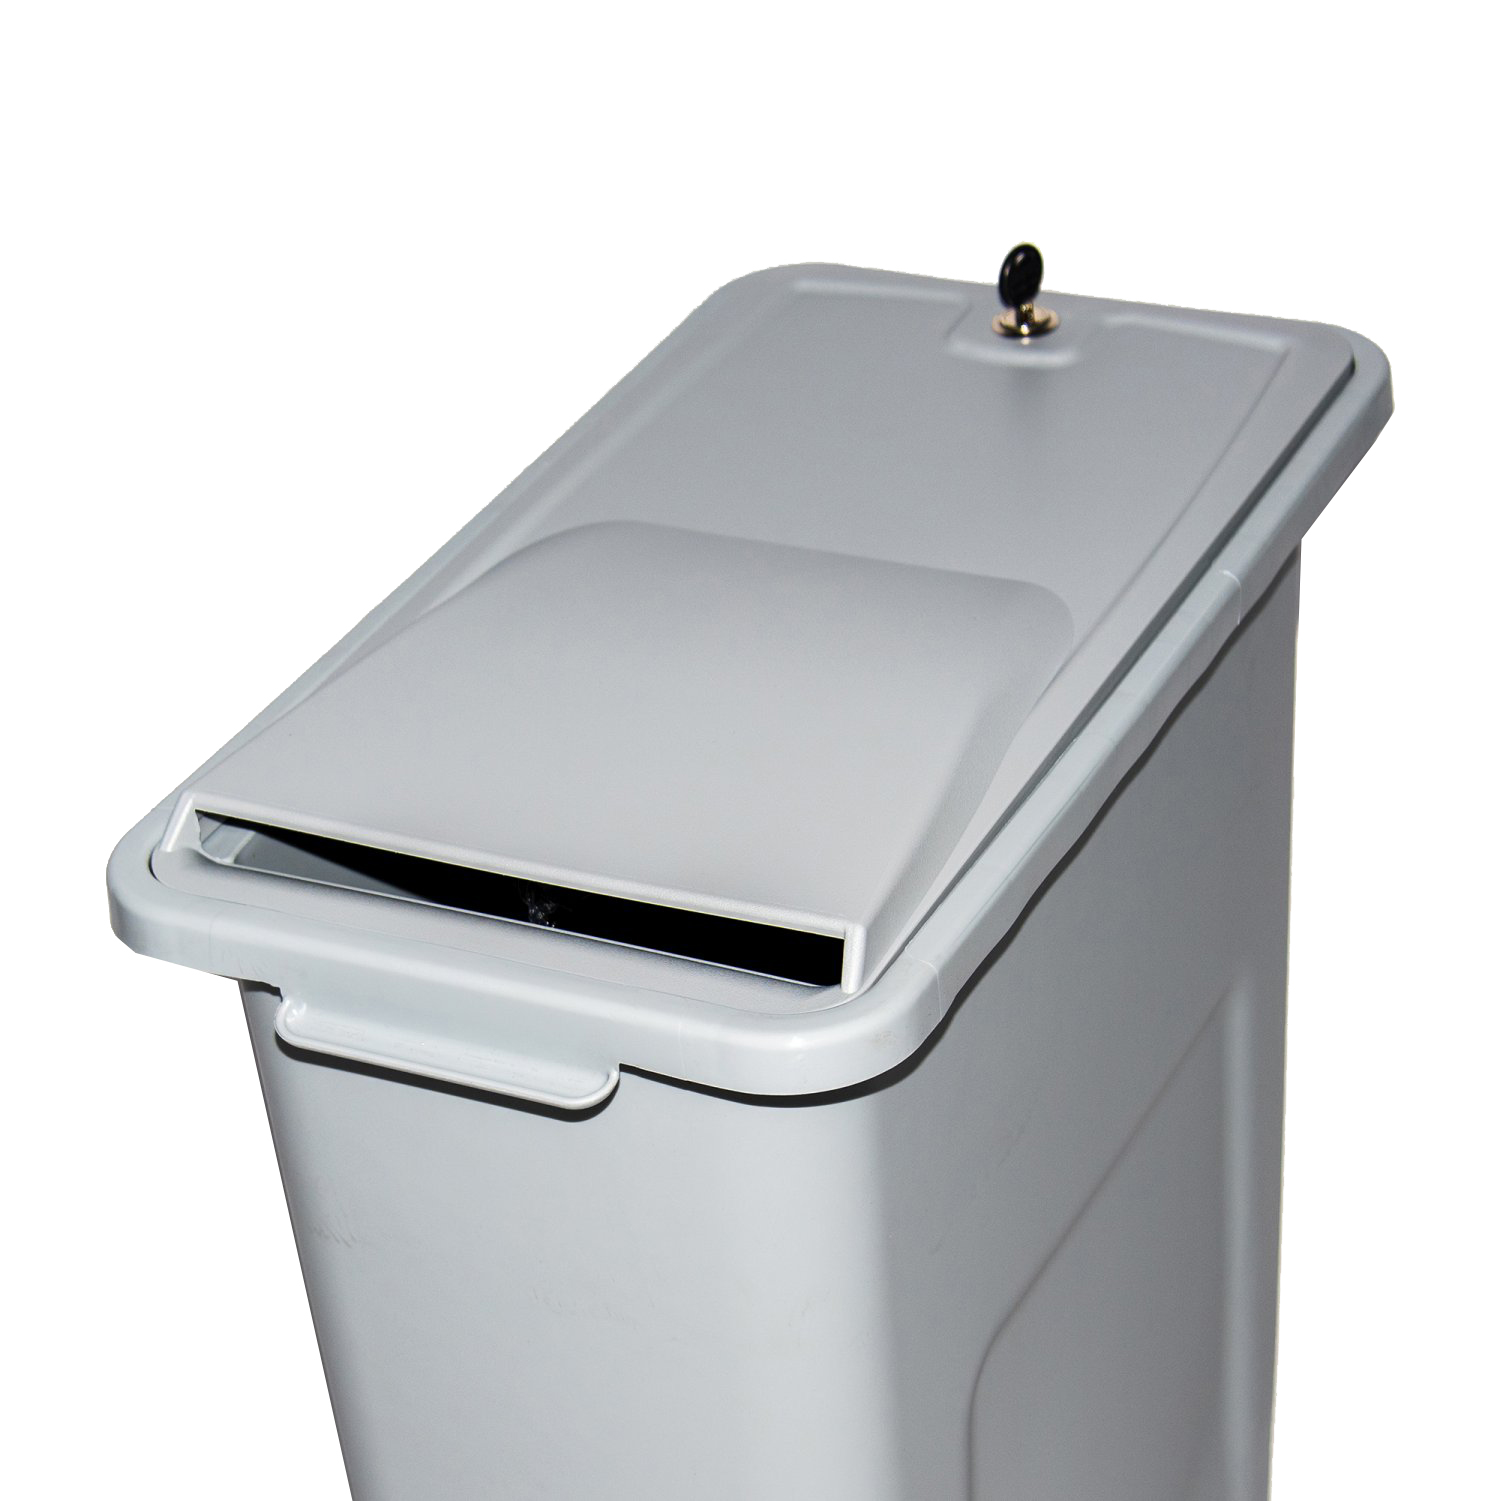 SHRED-L-44-LOCK Shredinator Dispose of confidential paper in the Shredinator.
The Shredinator is a gray 87 liter bin for collecting confidential documents. Through the lid with lock, your collected documents are safe. By connecting several Shredinators with a connector you can create your own waste station. And by means of stickers you can indicate for which type of waste the bin is intended. We recommend buying a complete set, but you can also order the lid and connector separately.